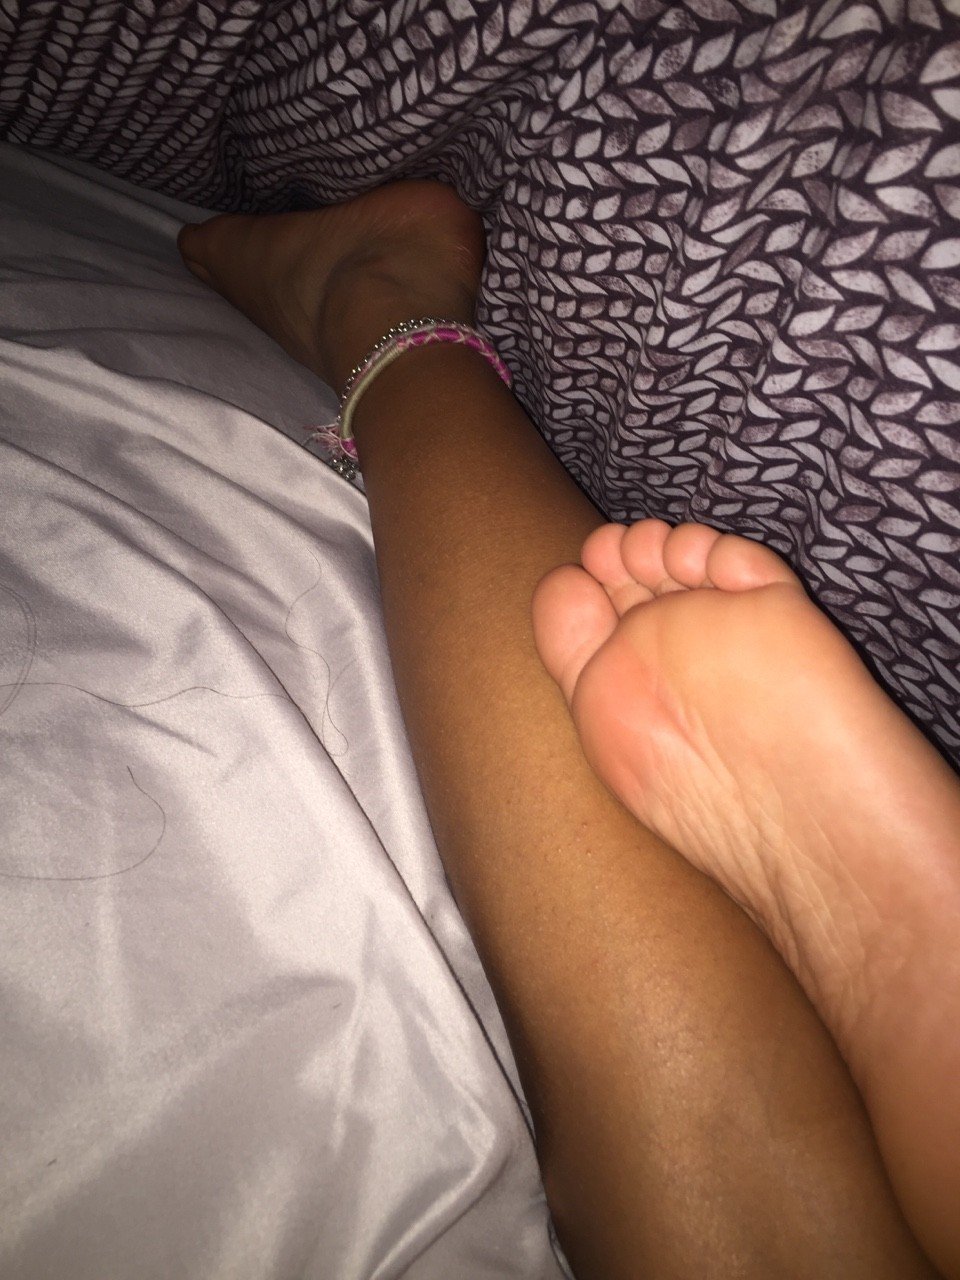 Photo by Nilegoddess with the username @Nilegoddess, who is a star user,  November 6, 2018 at 9:02 AM and the text says 'Goodnight babes  #sexy  #teen  #foot  #feet  #slut  #legs  #ass  #butt  #panty  #panties  #soles  #toes  #foot  #wrinkles  #young  #lower  #back  #calves  #thighs  #mound  #fetish'